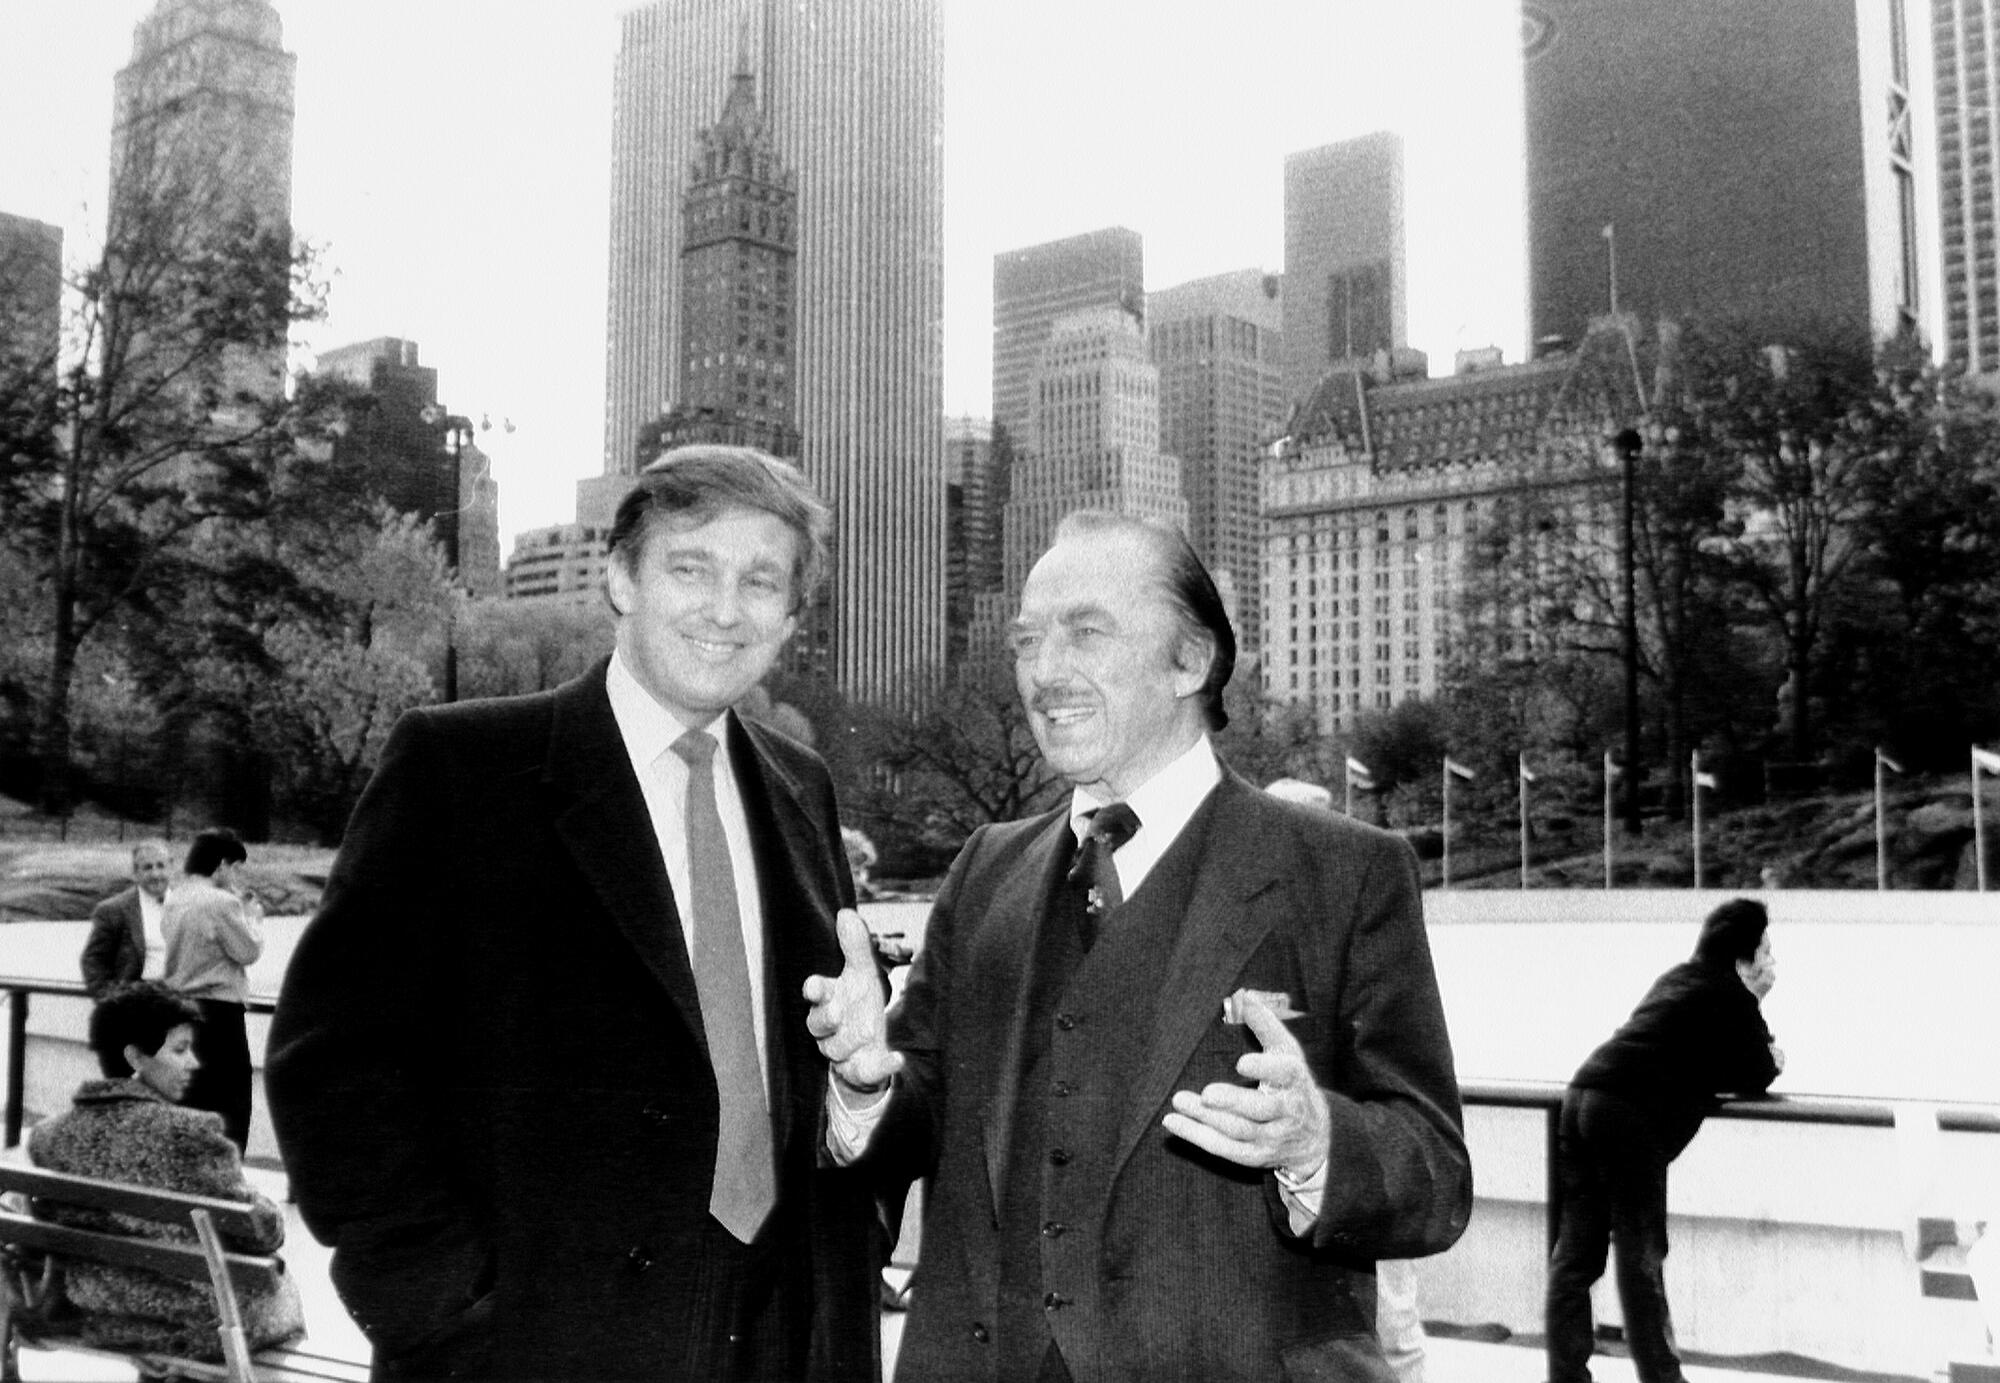 Two men in suit and tie, both smiling, with skyscrapers in the background